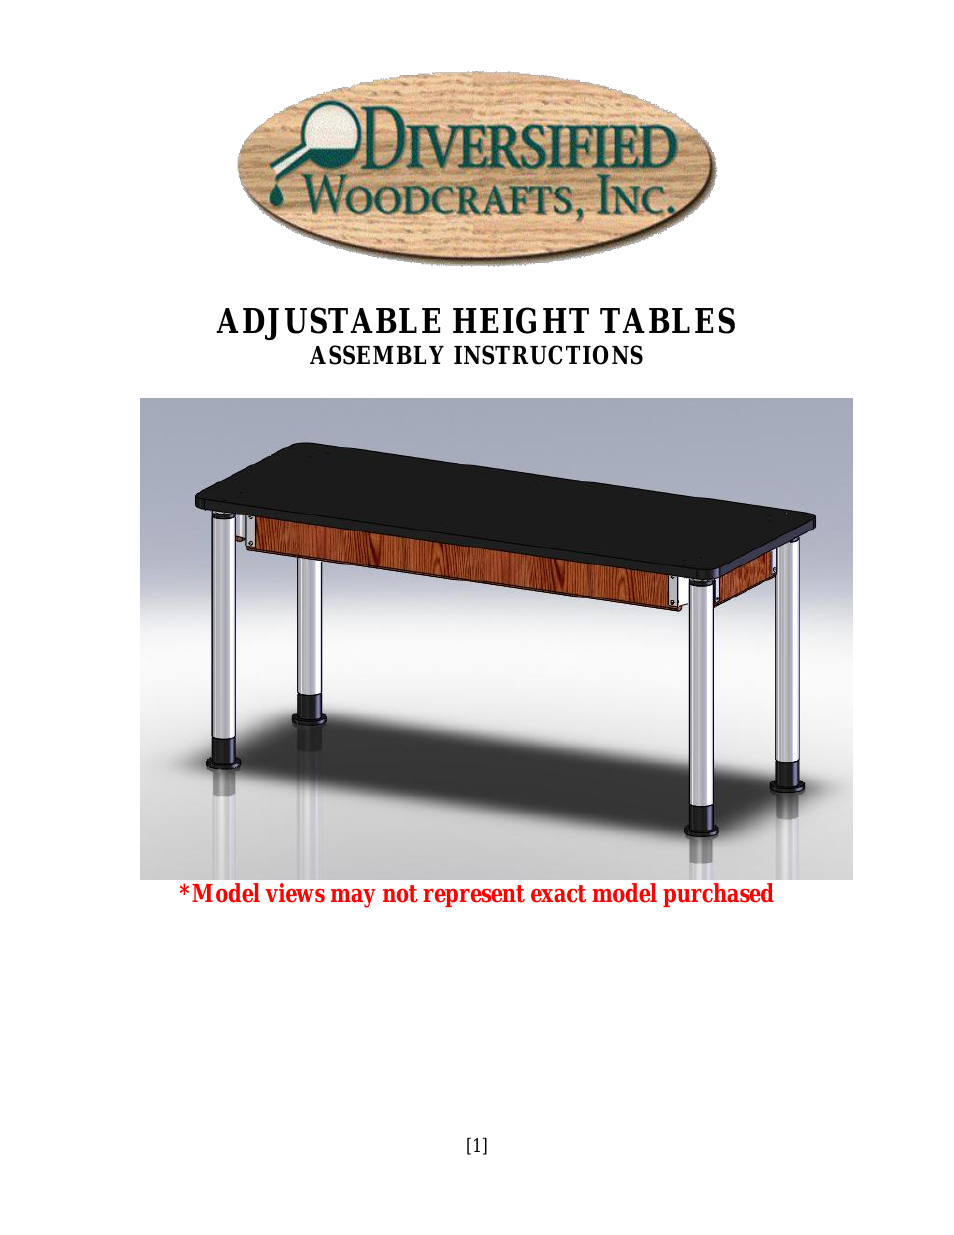 ADJUSTABLE HEIGHT TABLES